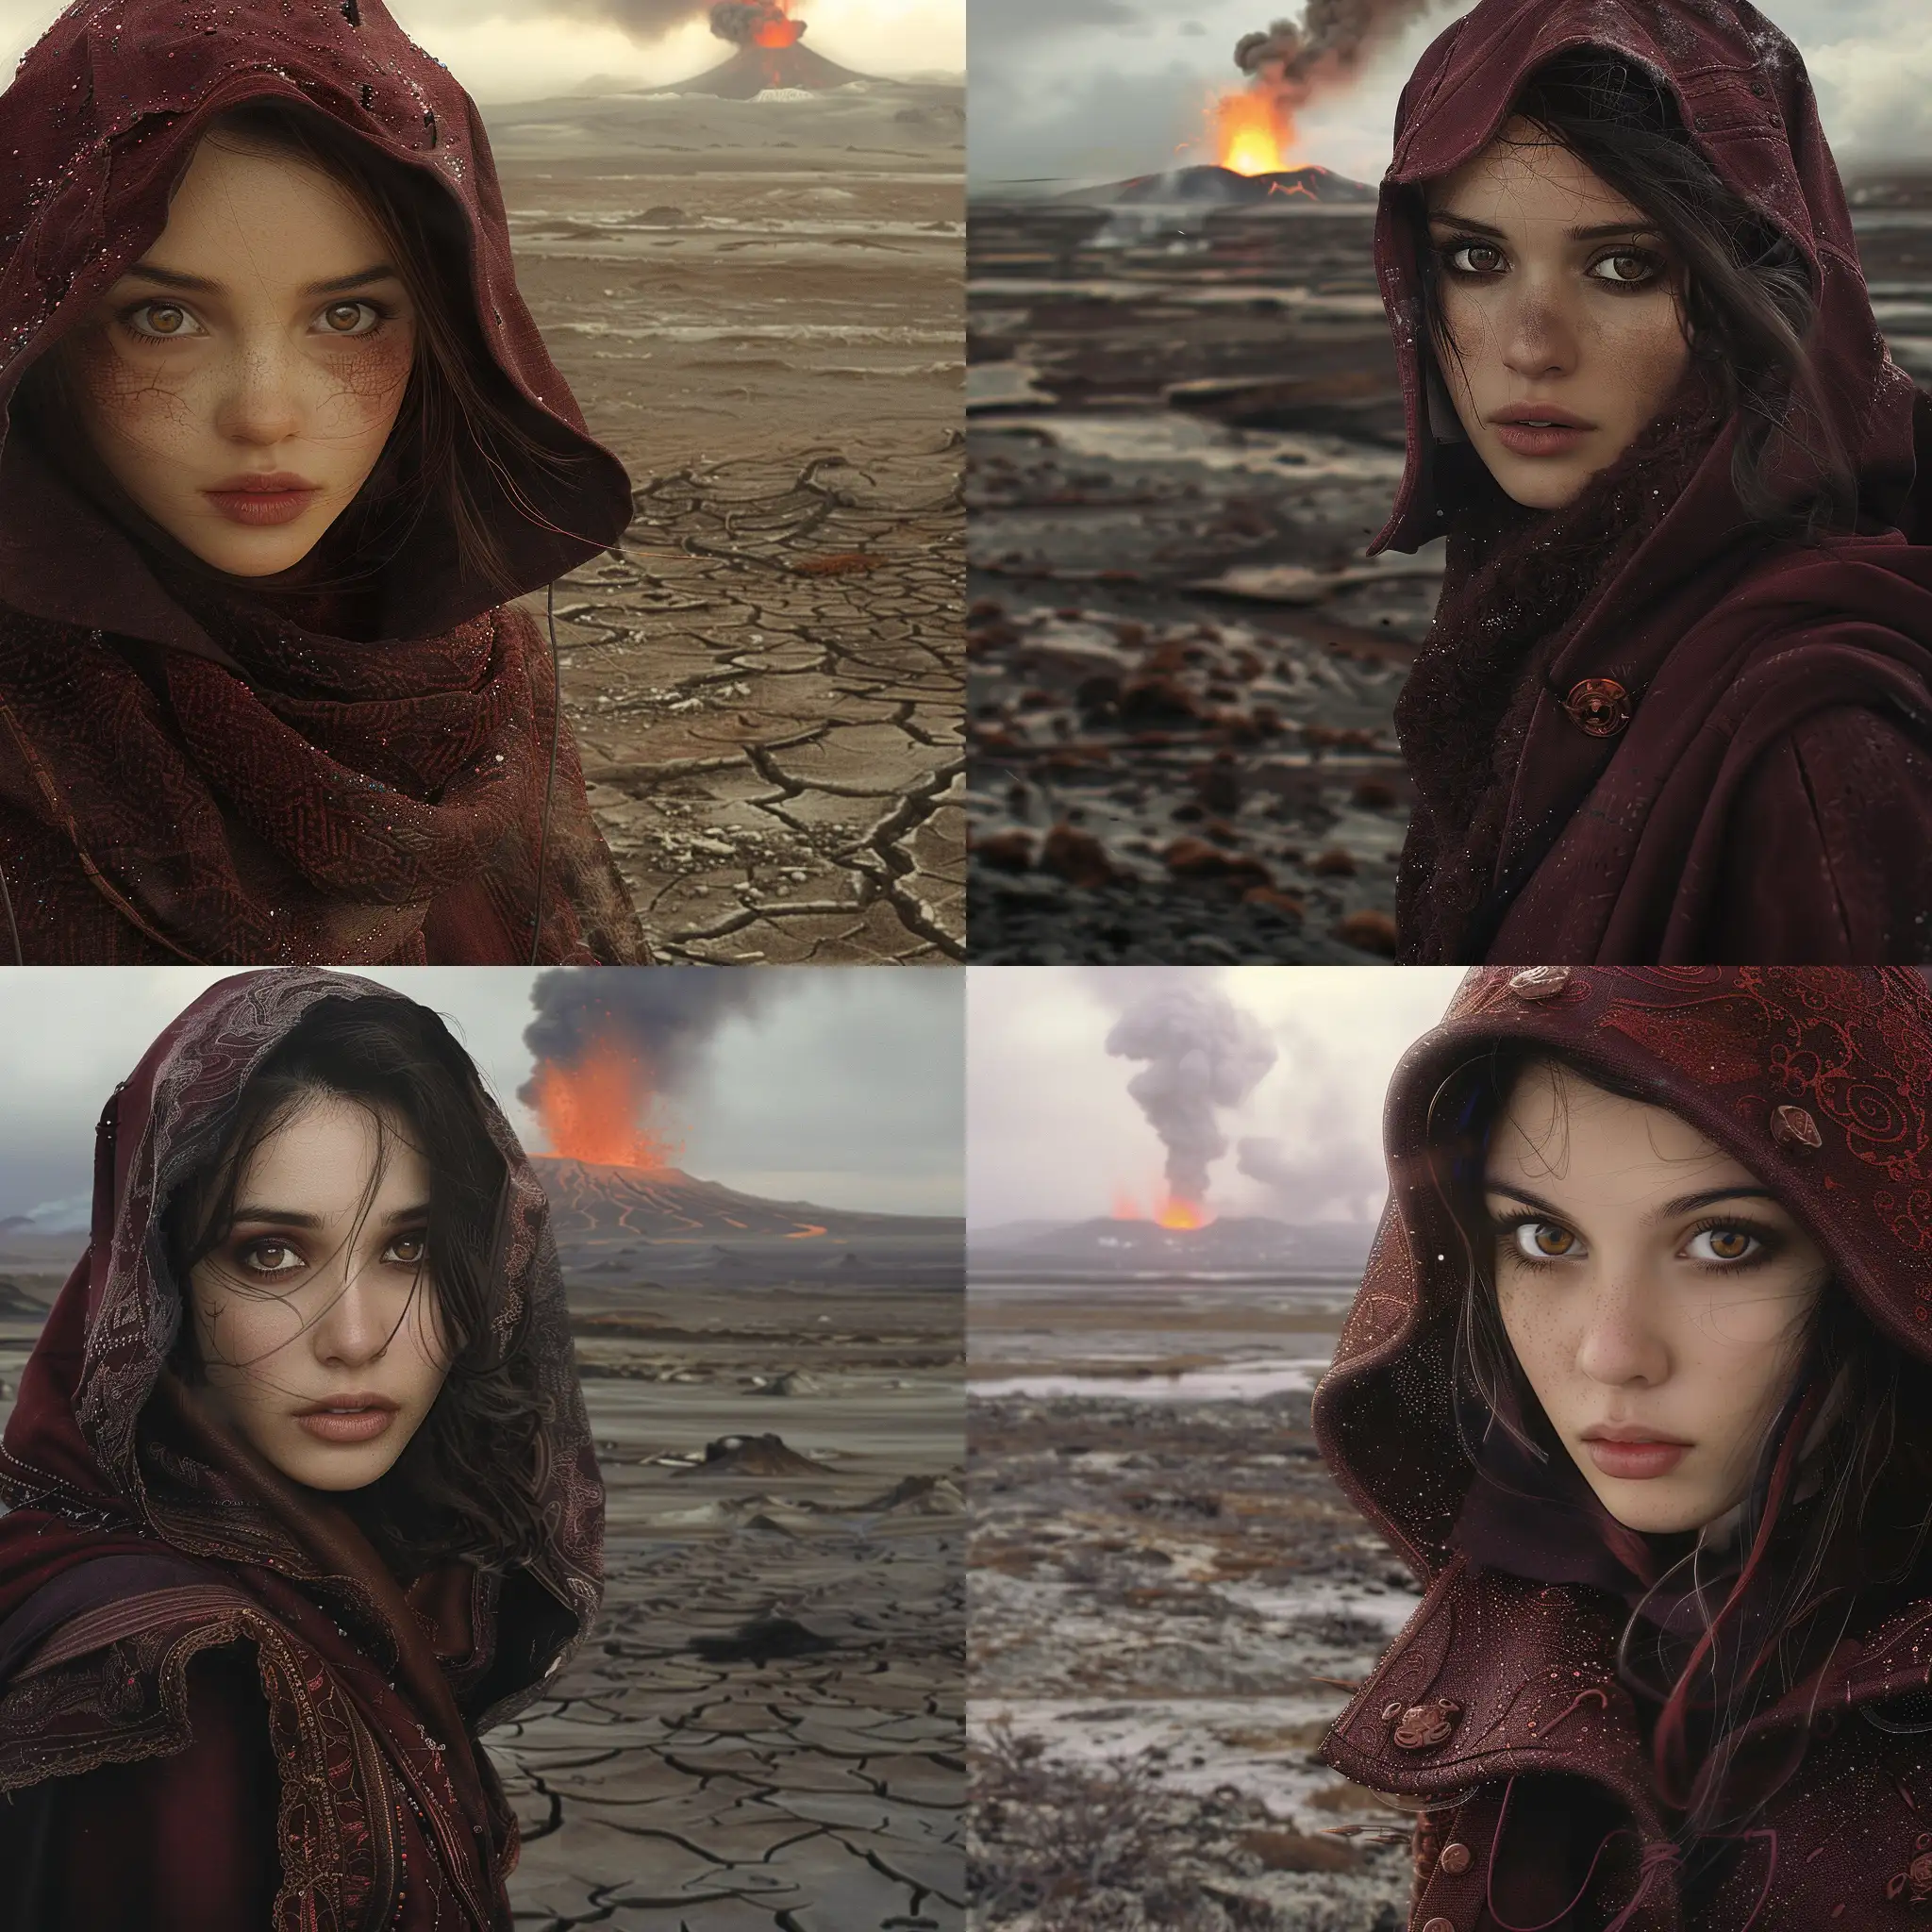 A highly detailed striking image of a beautiful woman wearing a dark red coat and hood with brown eyes. She is walking through a barren apocalyptic land. In the distance is a volcano erupting. Beautiful magical mysterious fantasy surreal highly detailed